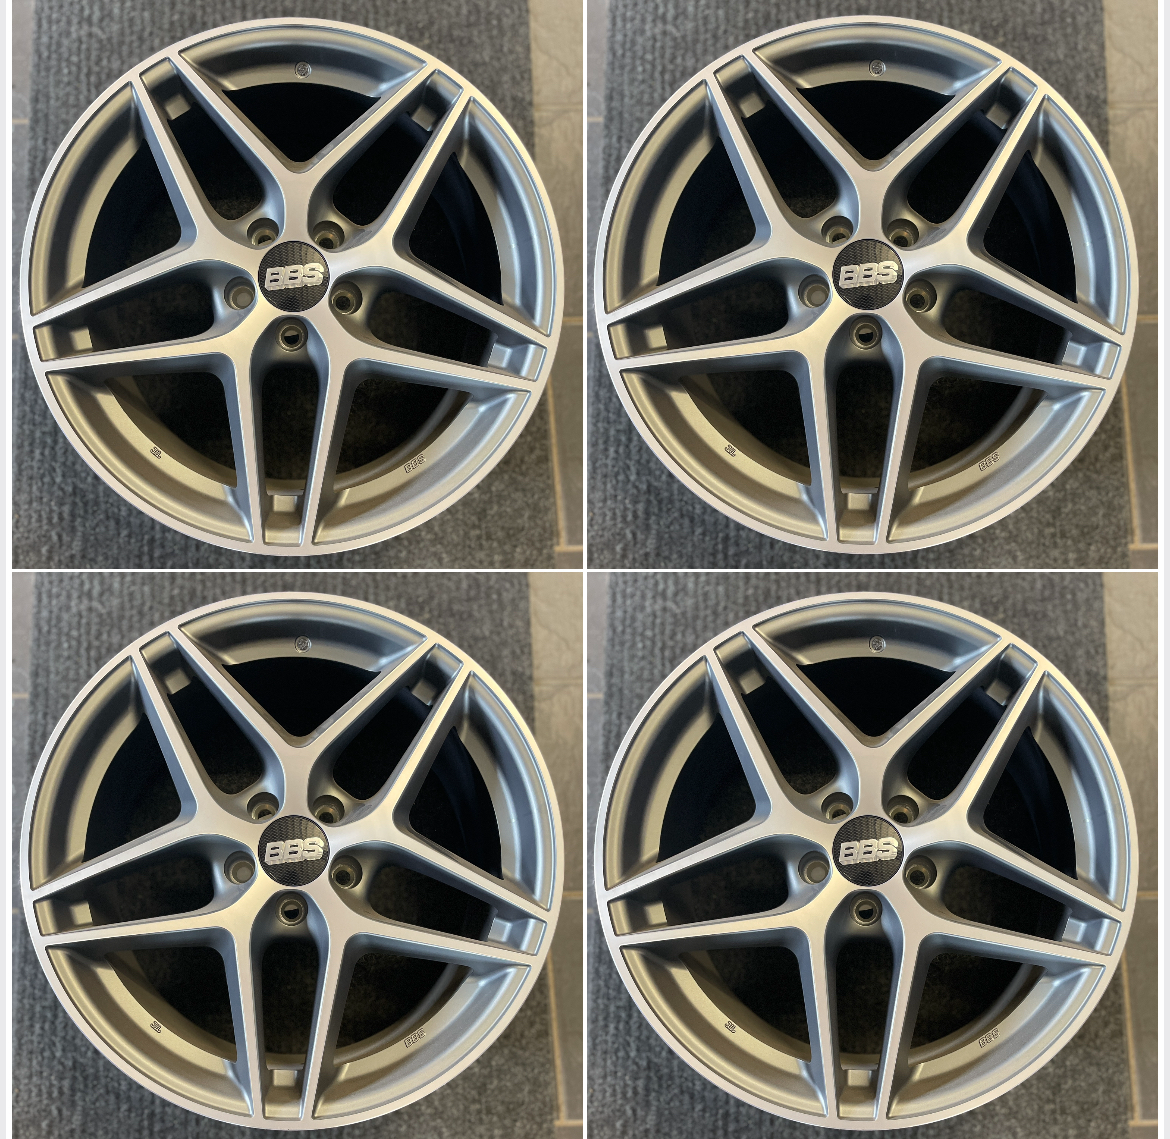 Buy Used BBS CF Rims 19-Inch On Sale At 25% Discount | bbs rims | 19" bbs cf rims for sale | 19" bbs cf rims near me | 19" bbs cf rims tires | 19" bbs cf rims wheels | bbs wheels color chart | bbs 20 inch wheels | bbs motorsports wheels | bbs flow forming wheels | bbs forging wheels | bbs motorcycle wheels | bbs wheels sizes | bbs wheels for sale | Used 19-Inch BBS CF Rims